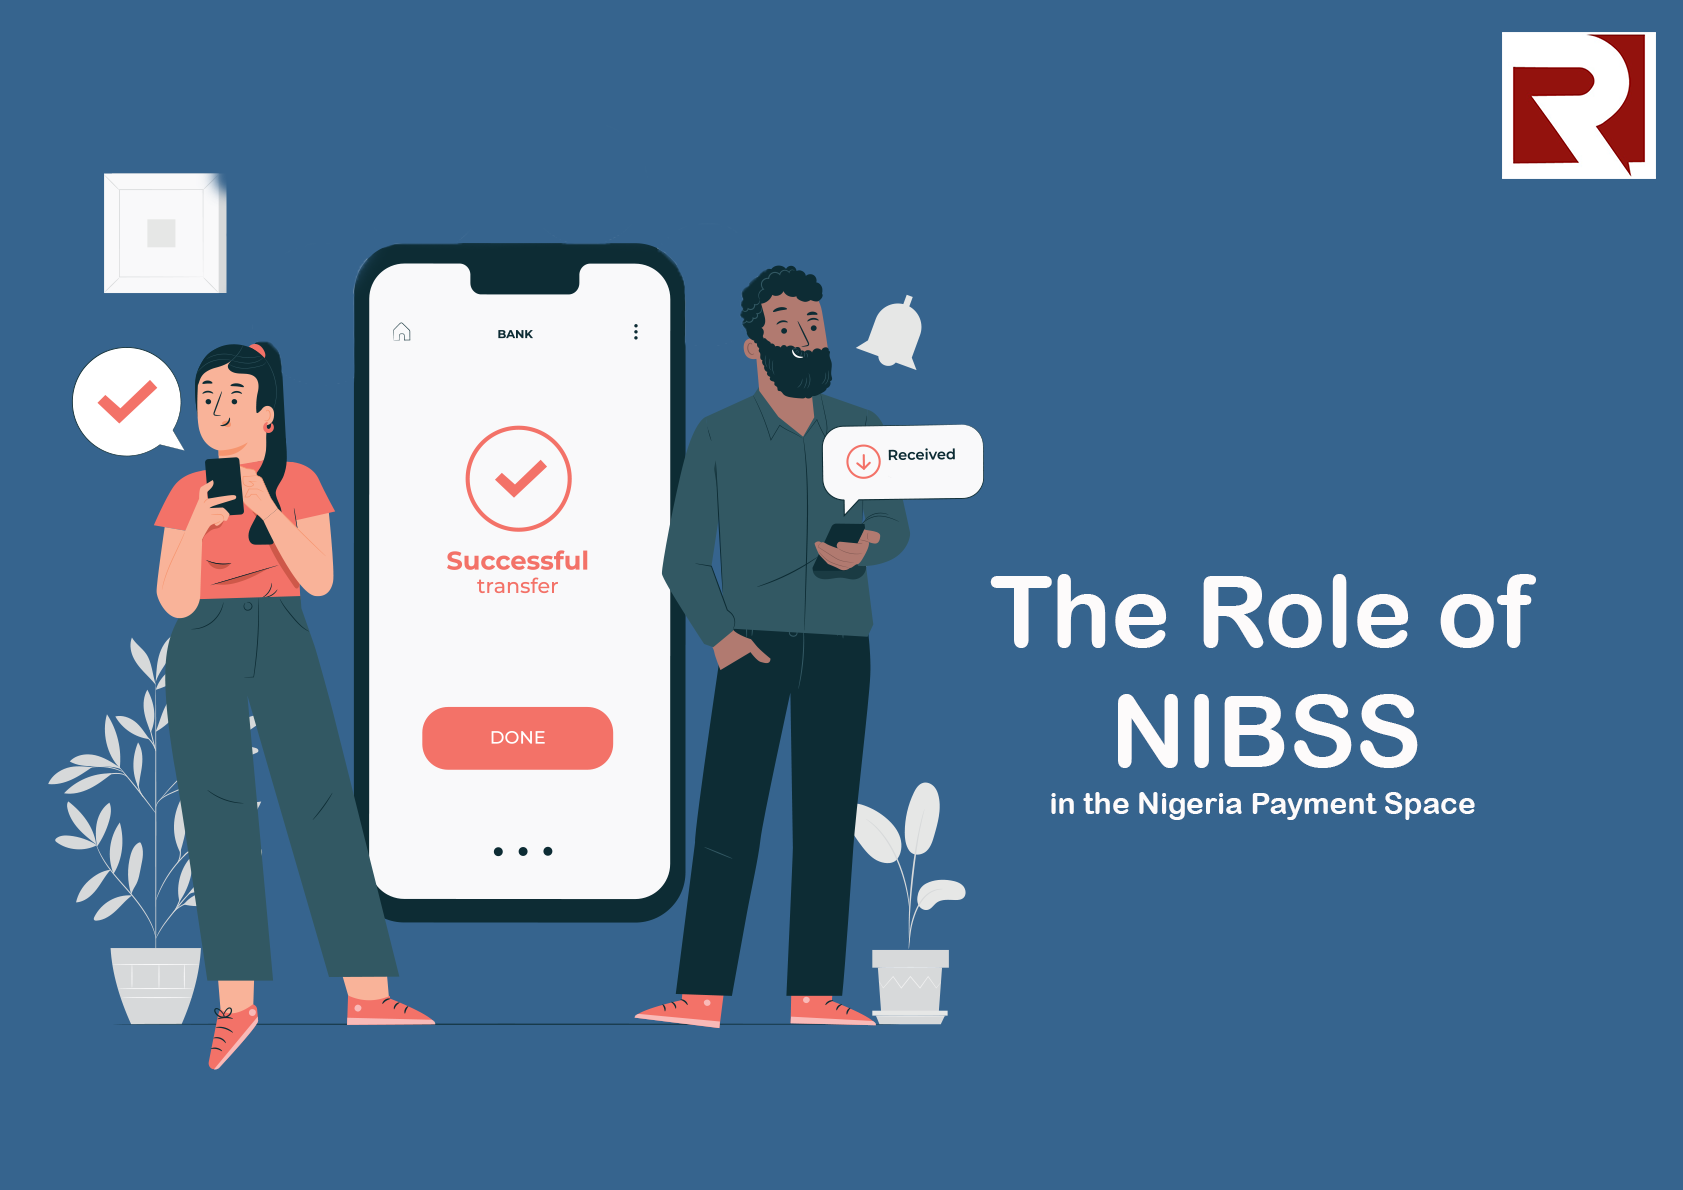 The Role of NIBSS in the Nigerian Payment Space